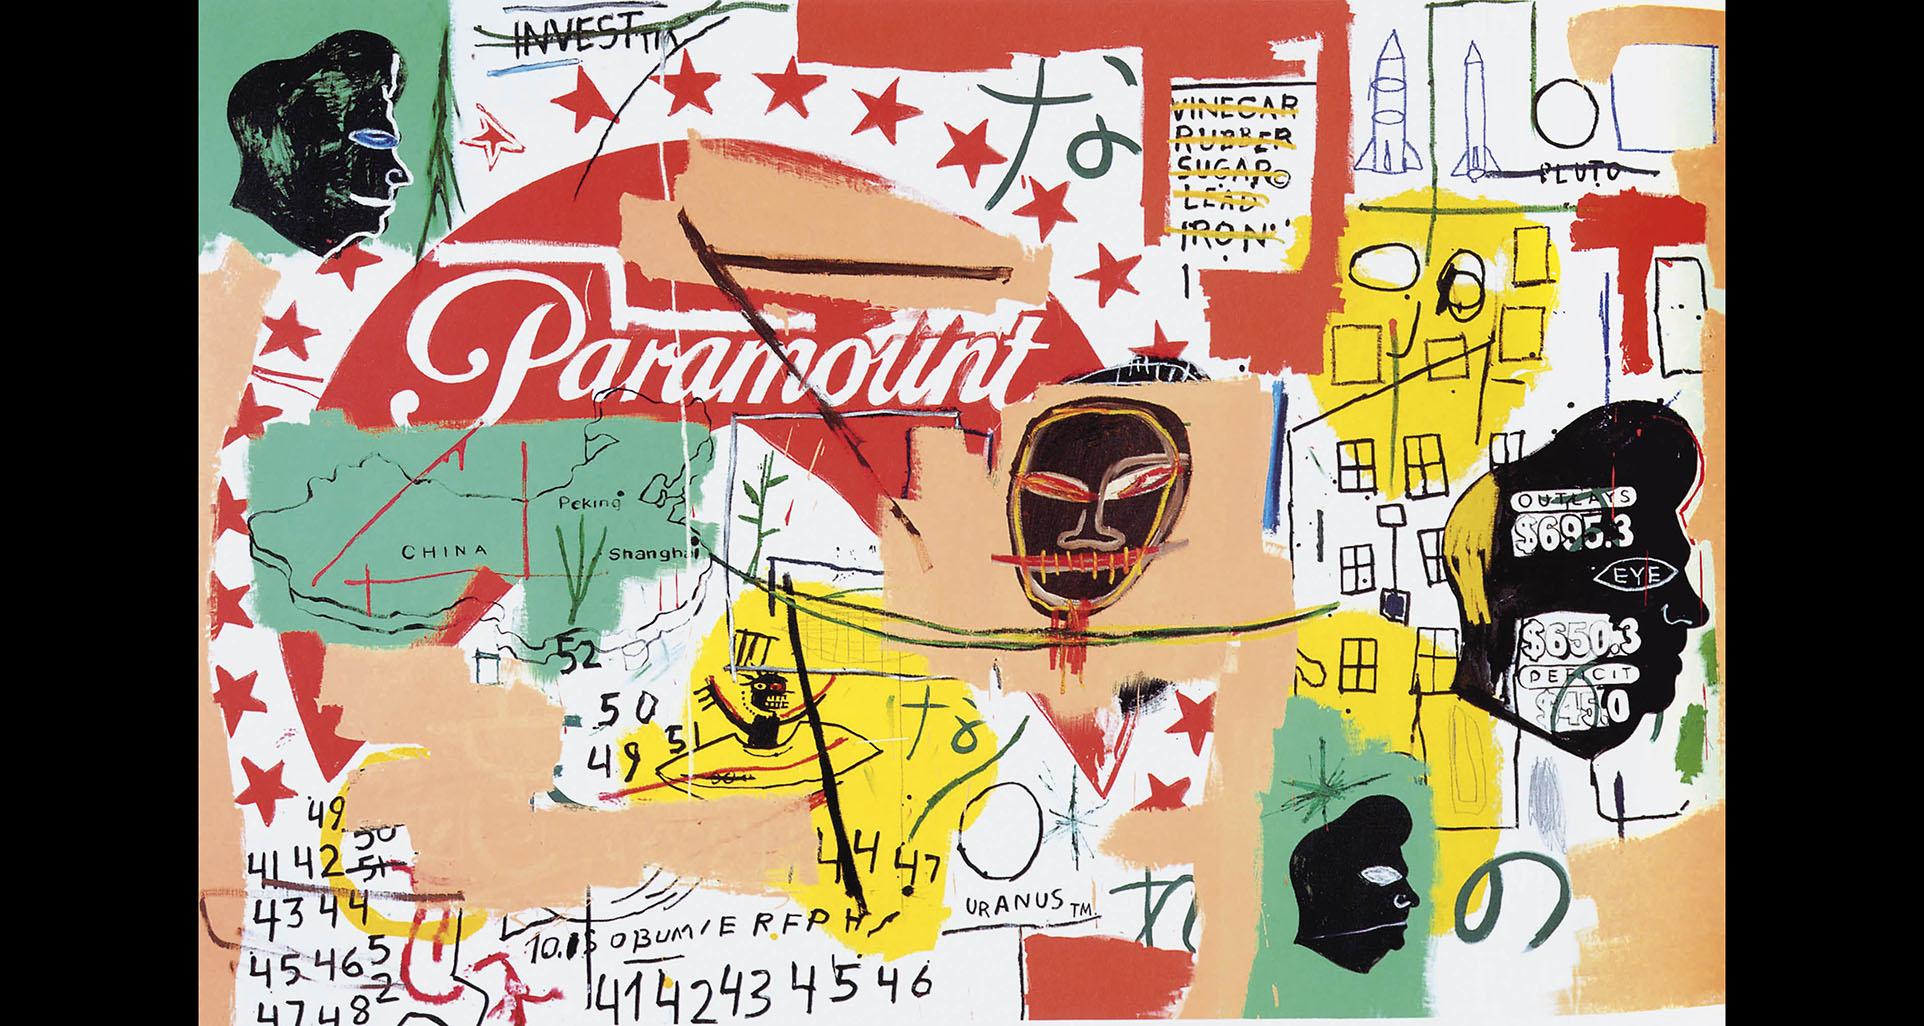 Andy Warhol, Jean-Michel Basquiat. “Paramount,” 1984–85. Private collection. © 2019 Jean-Michel Basquiat Estate. Licensed by Artestar, New York. © The Andy Warhol Foundation for the Visual Arts, Inc. / Artists Rights Society (ARS), New York.